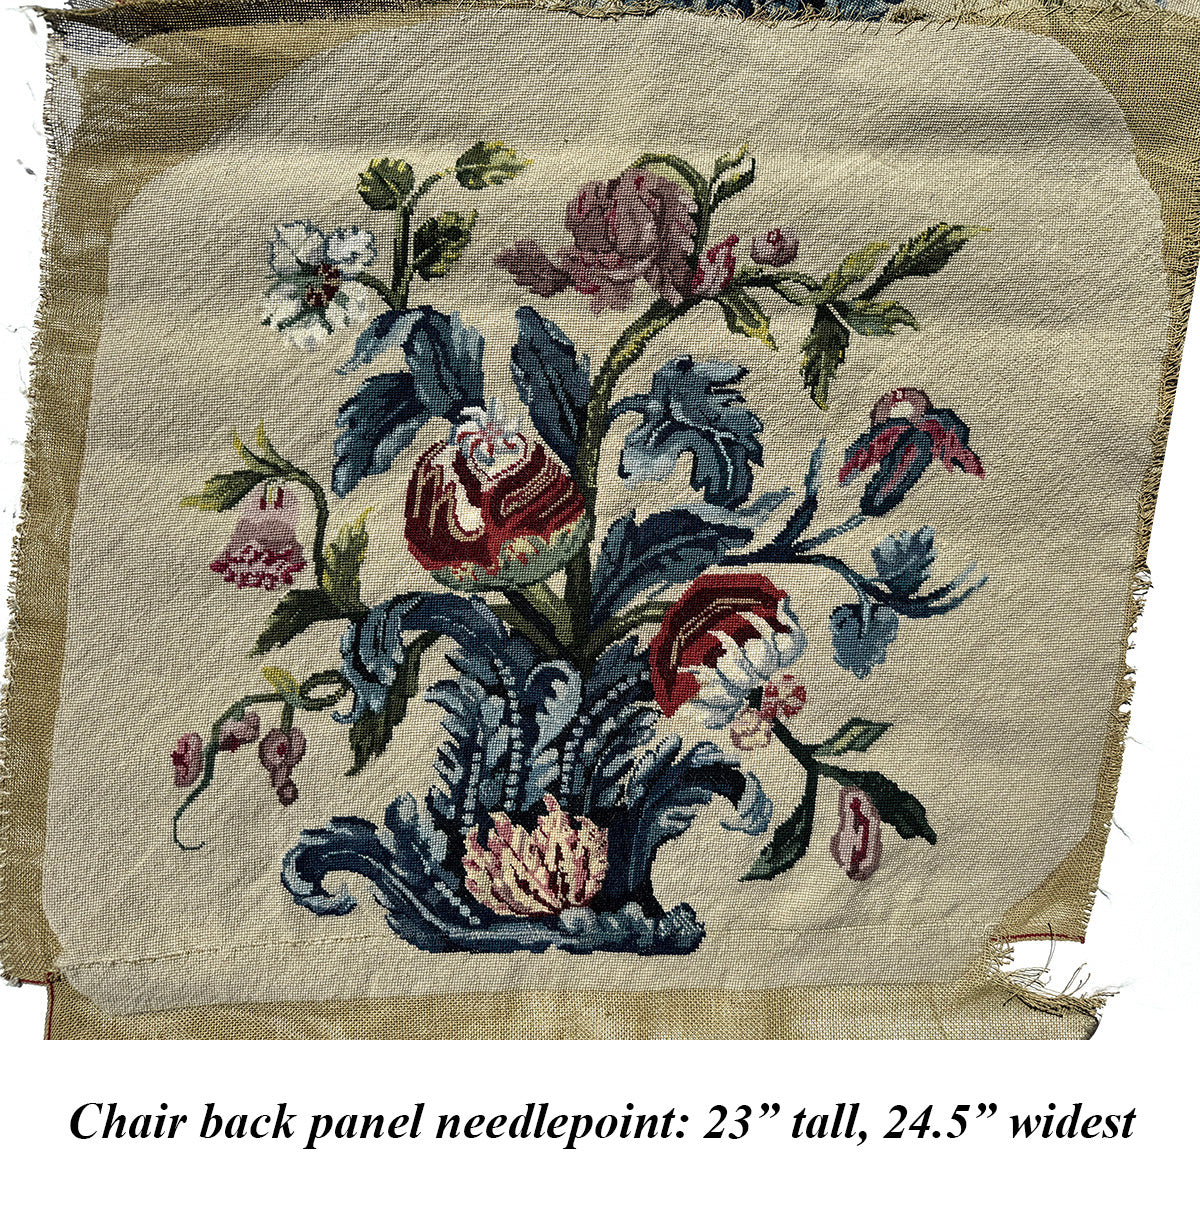 Fabulous Petit Point Needlepoint Unused Panels Made for Chair Upholstery, Make up 2 Pillows